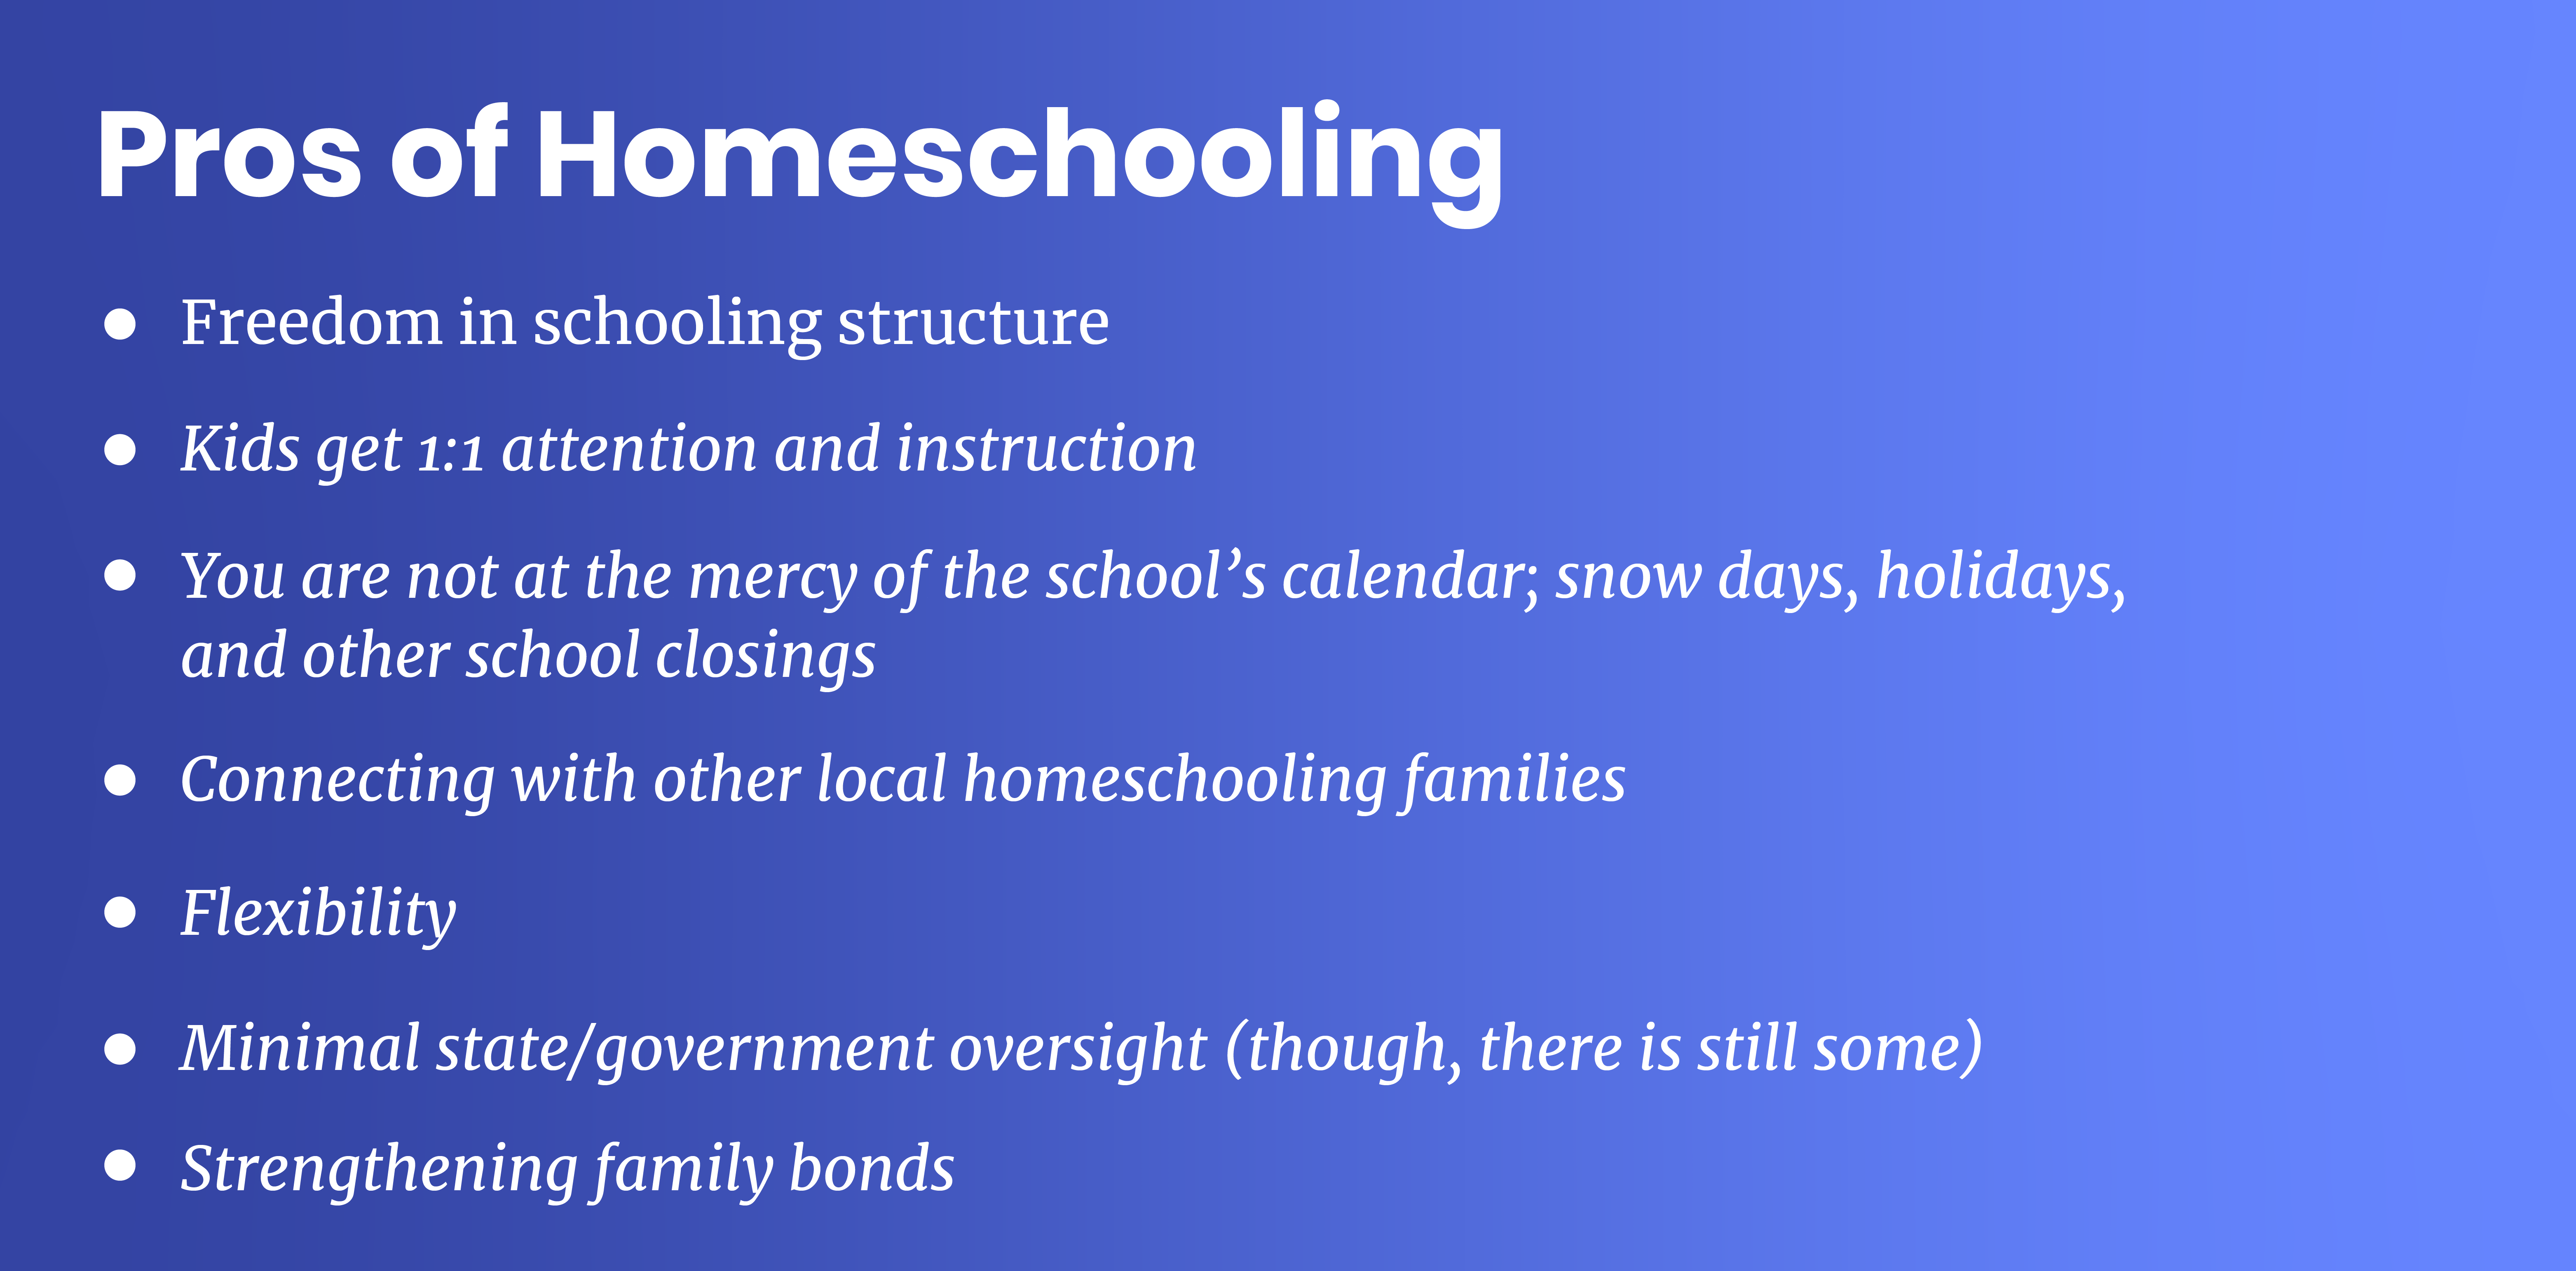 pros and cons homeschooling essay